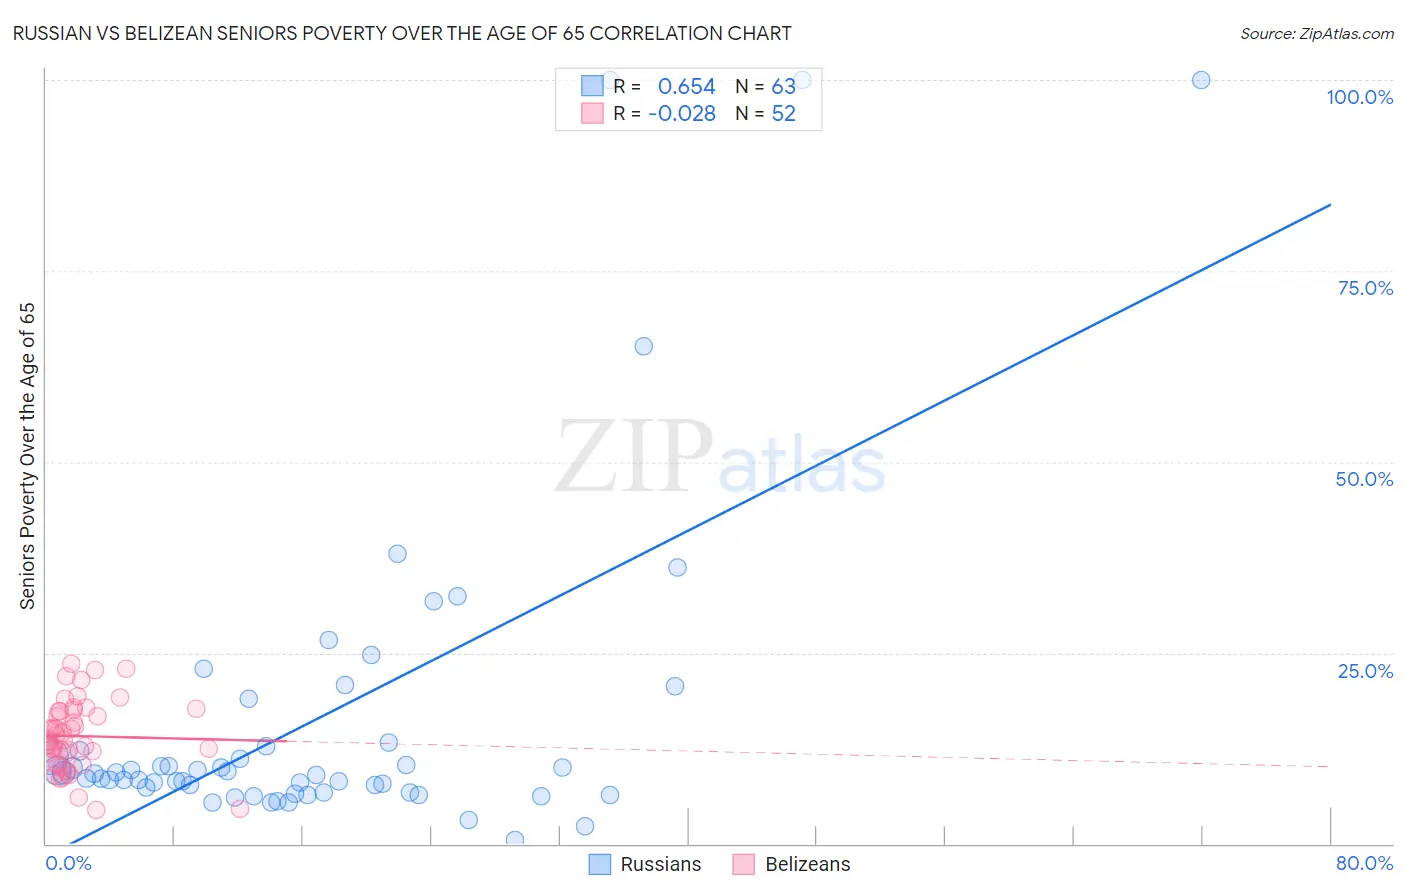 Russian vs Belizean Seniors Poverty Over the Age of 65